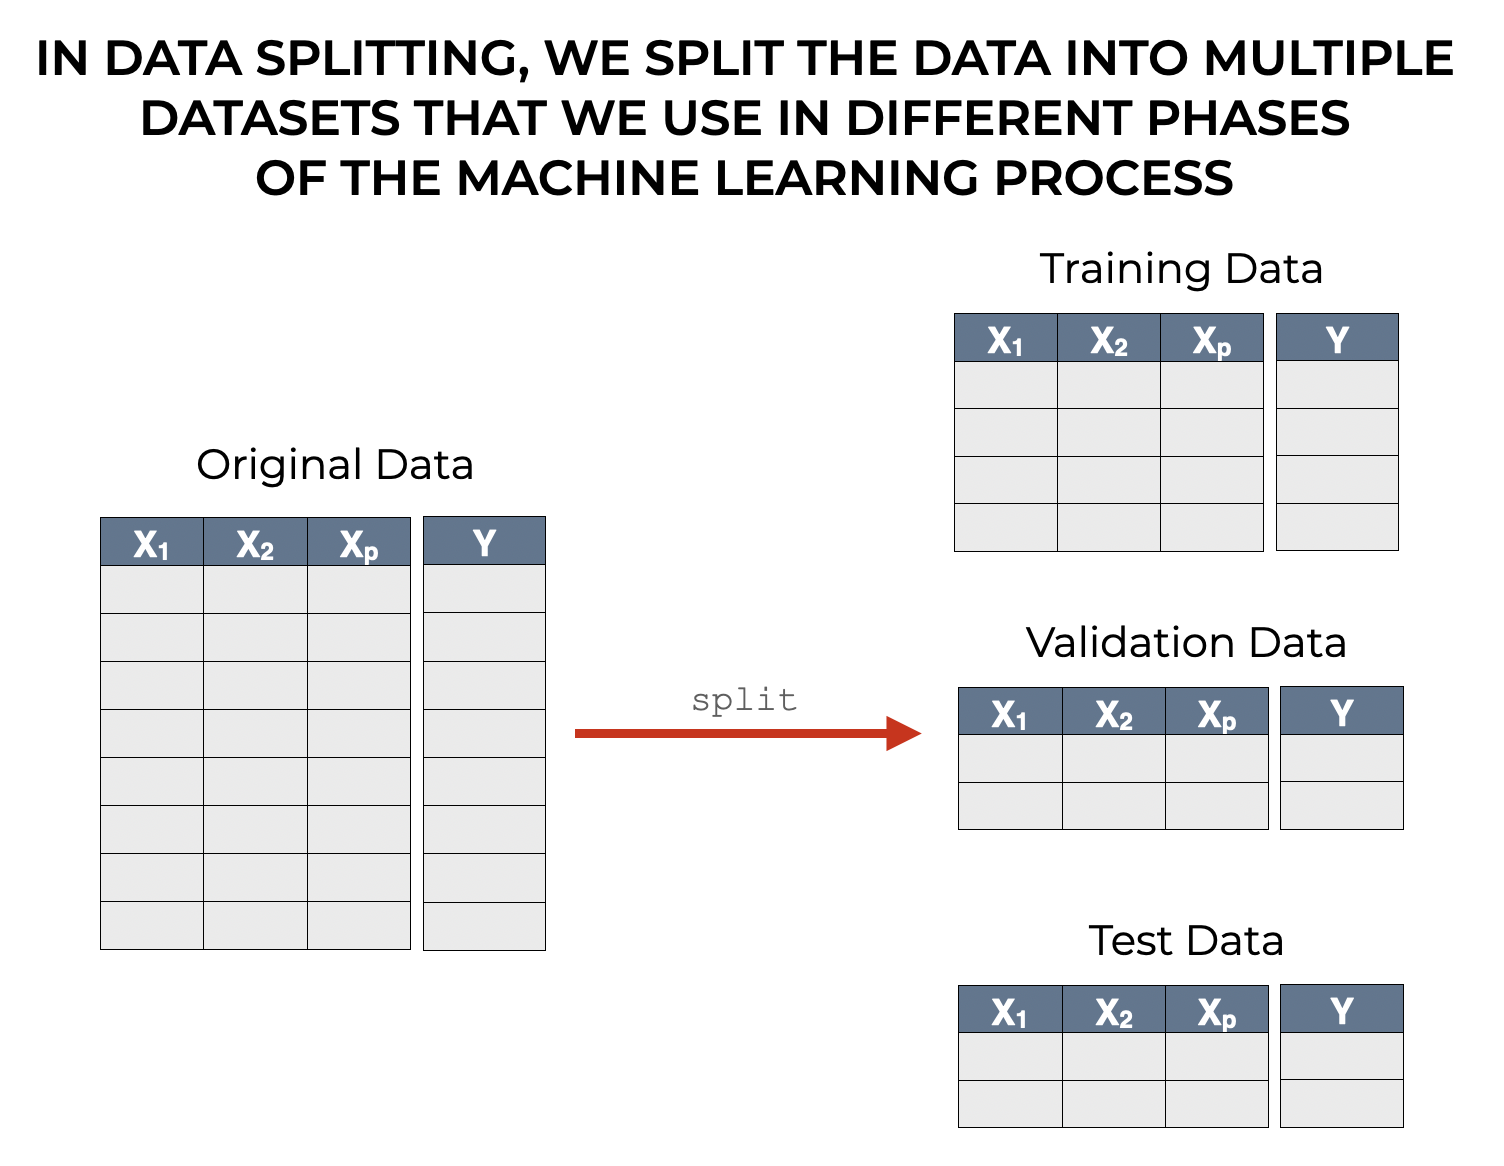 An image that shows how, in data splitting, we split the data into training, validation, and test data.